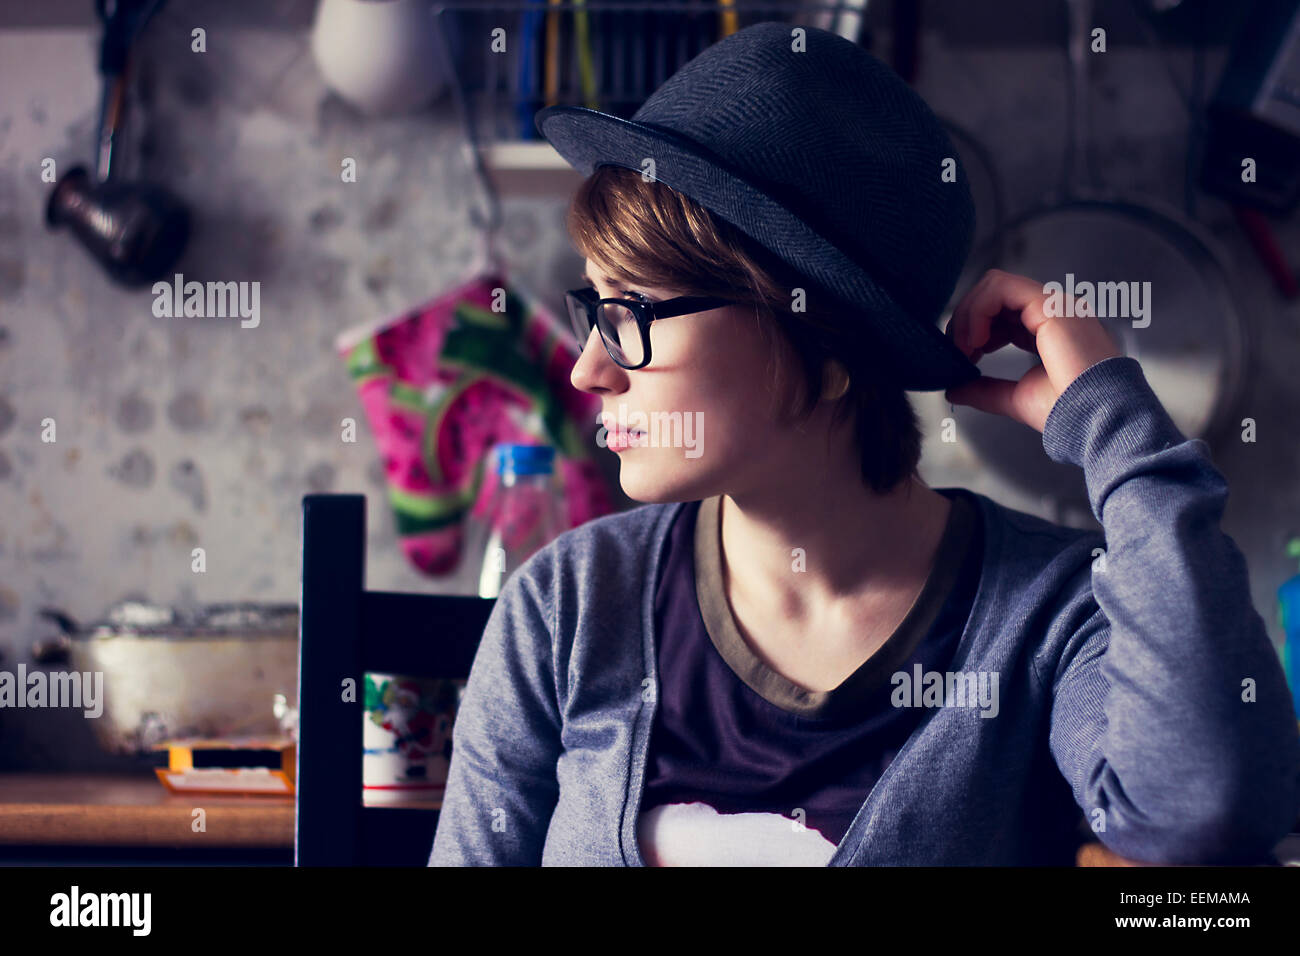 Caucasian woman wearing hat and eyeglasses in kitchen Stock Photo